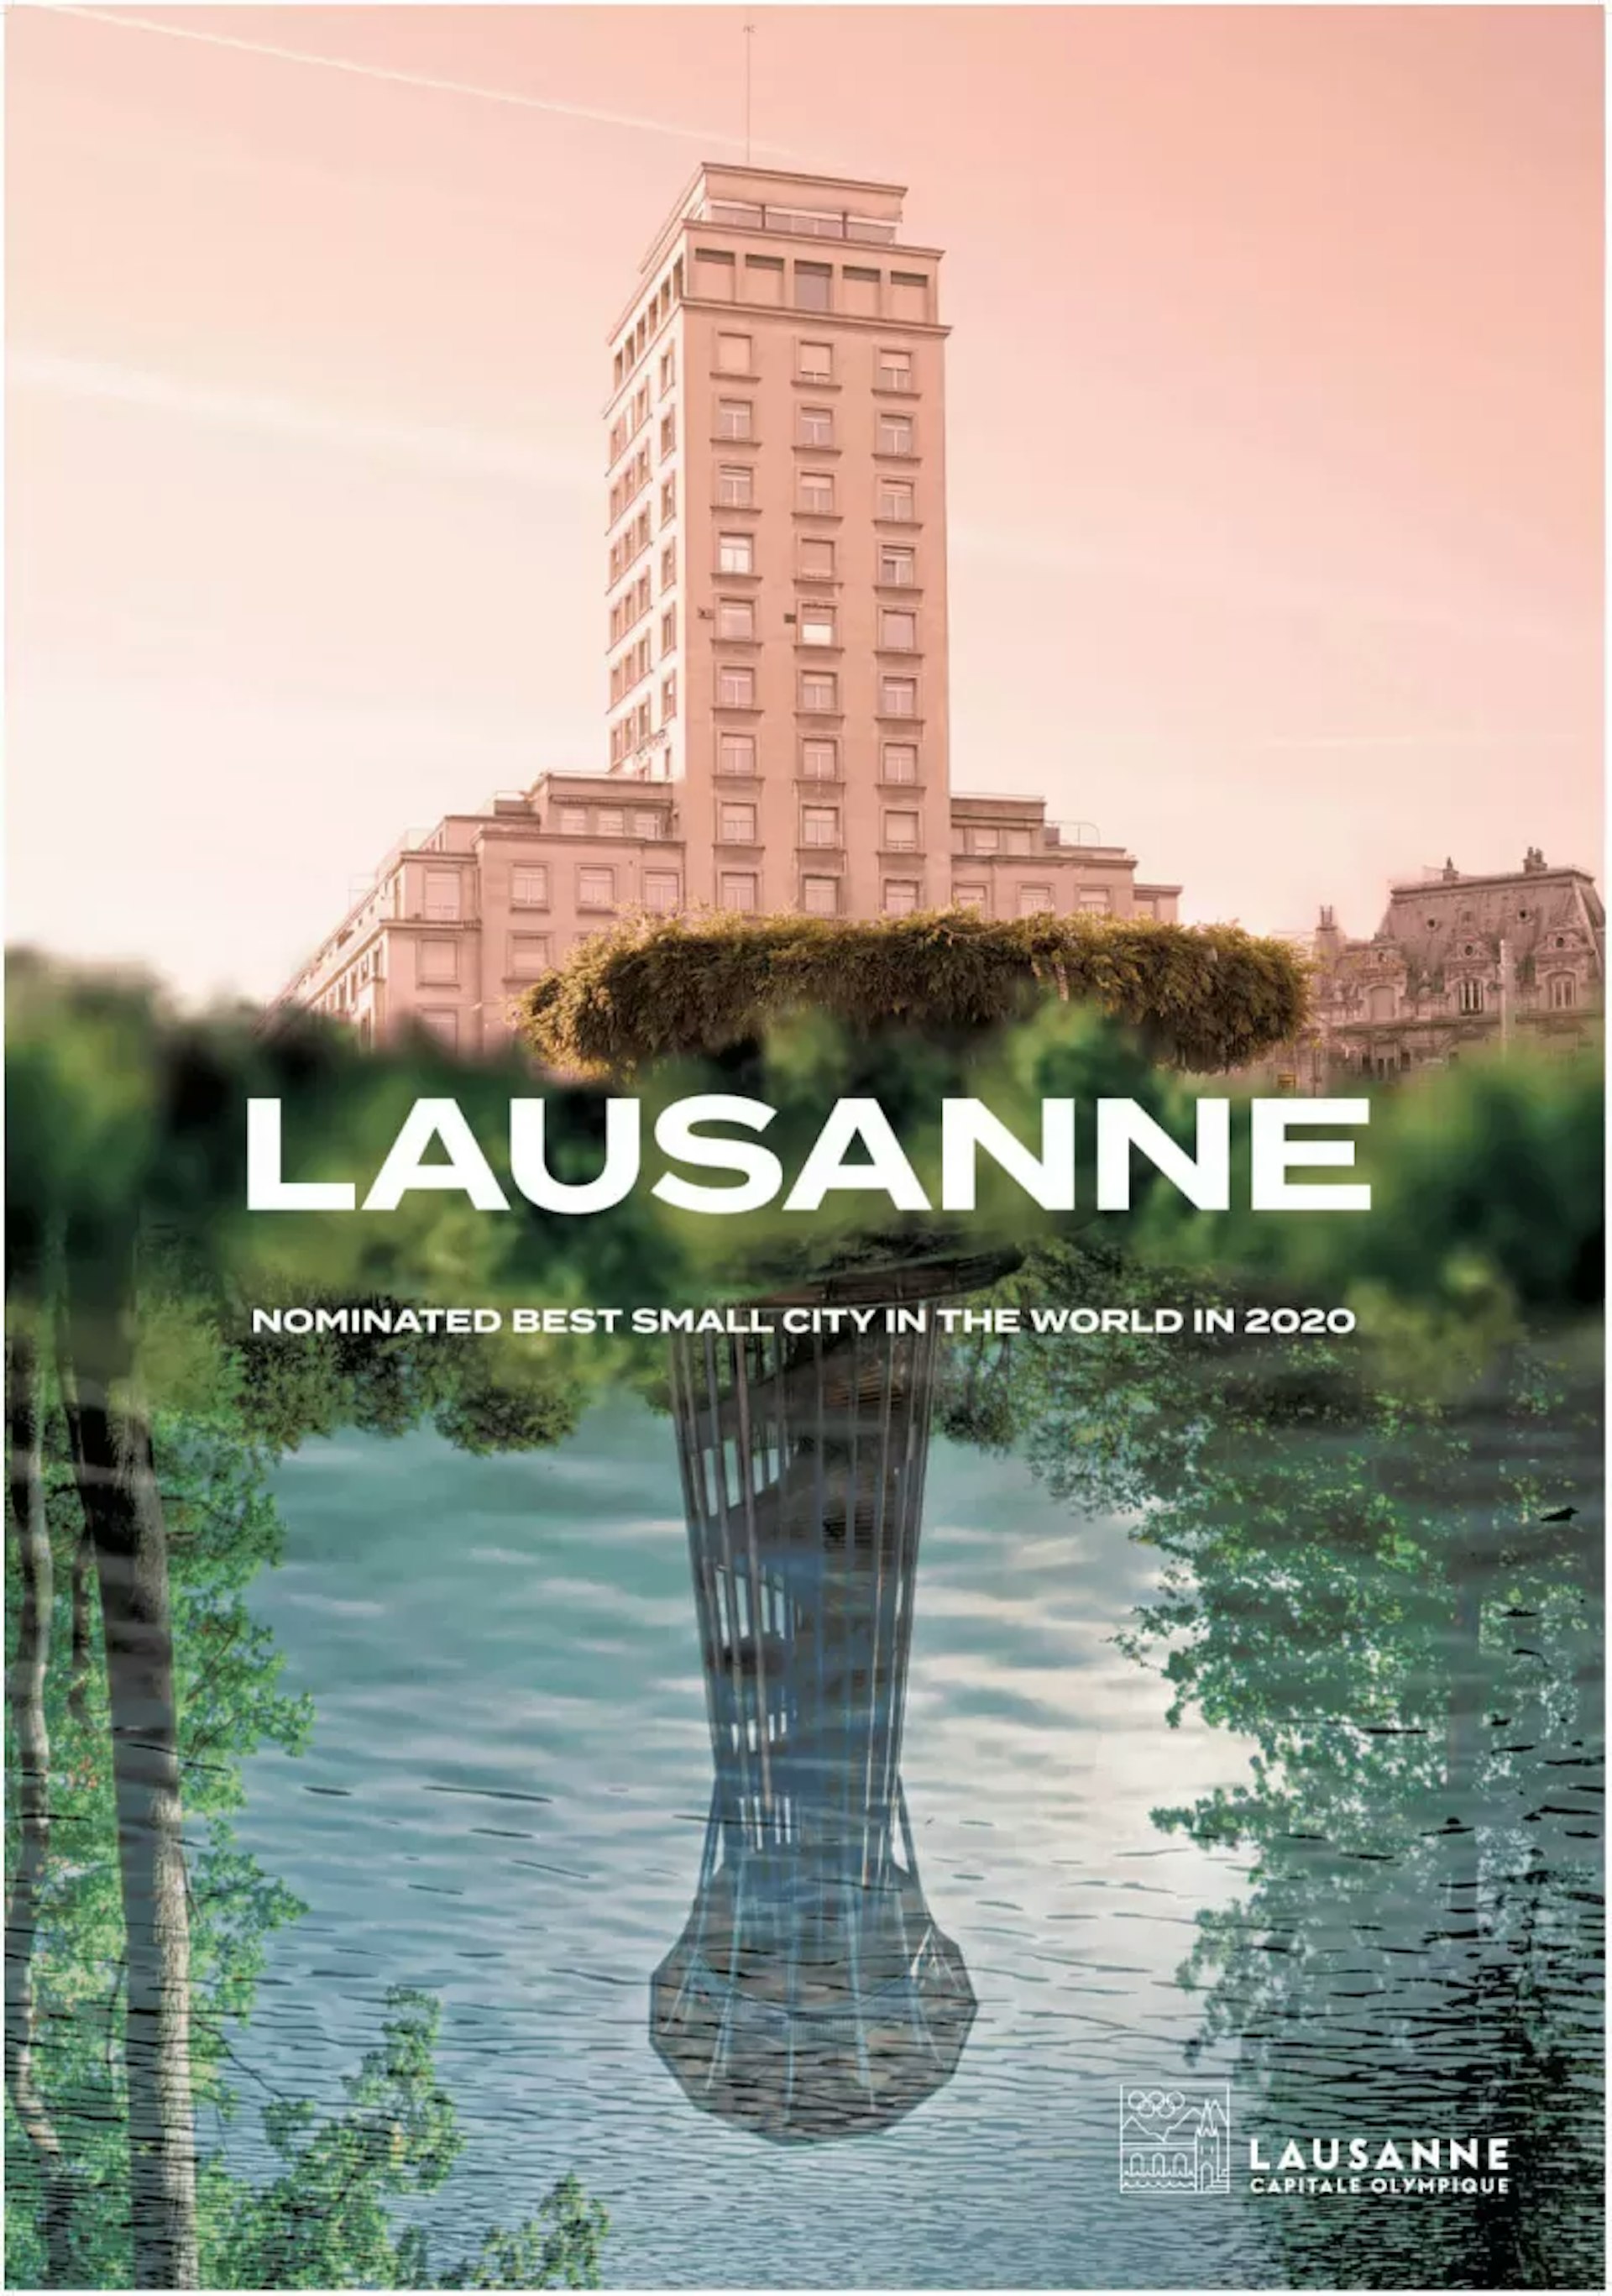 Promotional poster for Lausanne, best small city in the world